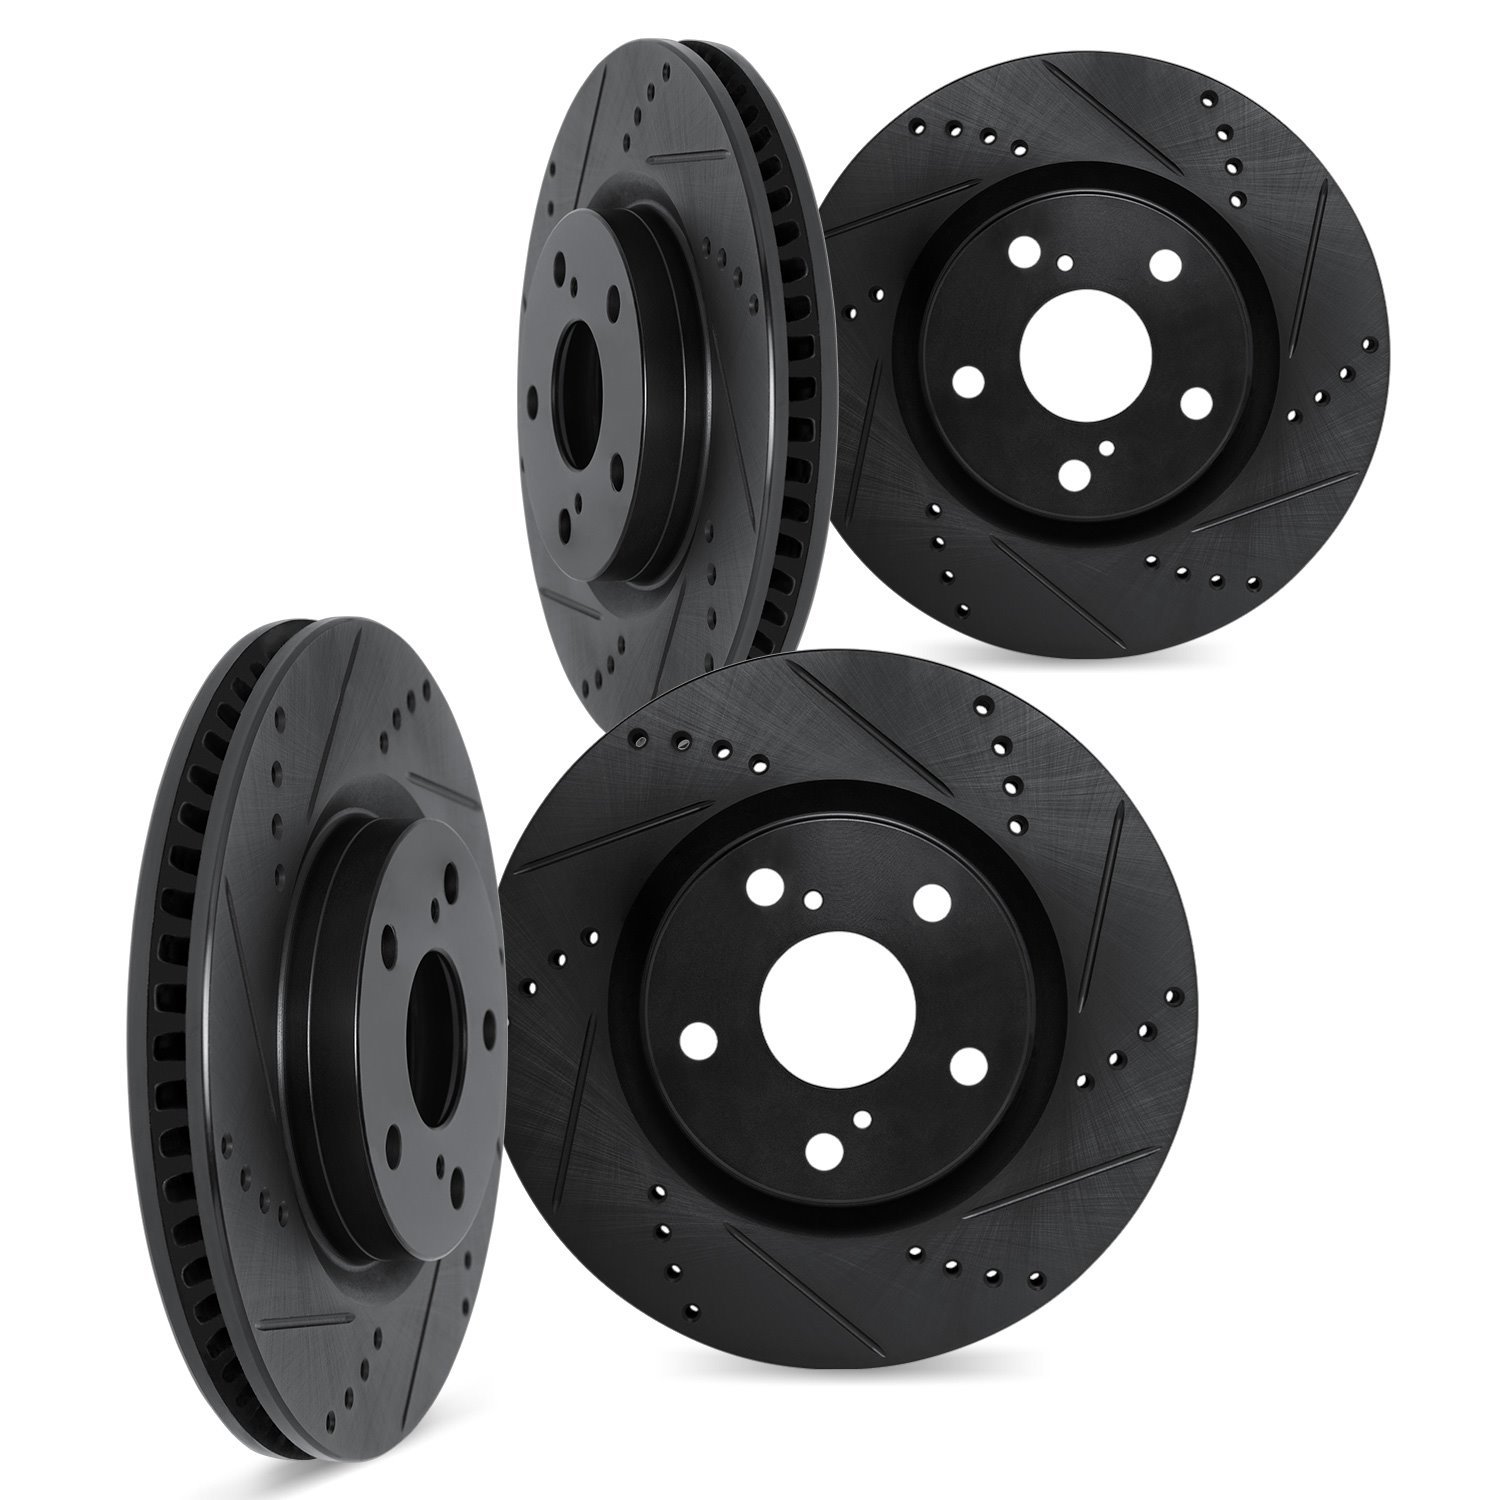 8004-47106 Drilled/Slotted Brake Rotors [Black], Fits Select GM, Position: Front and Rear